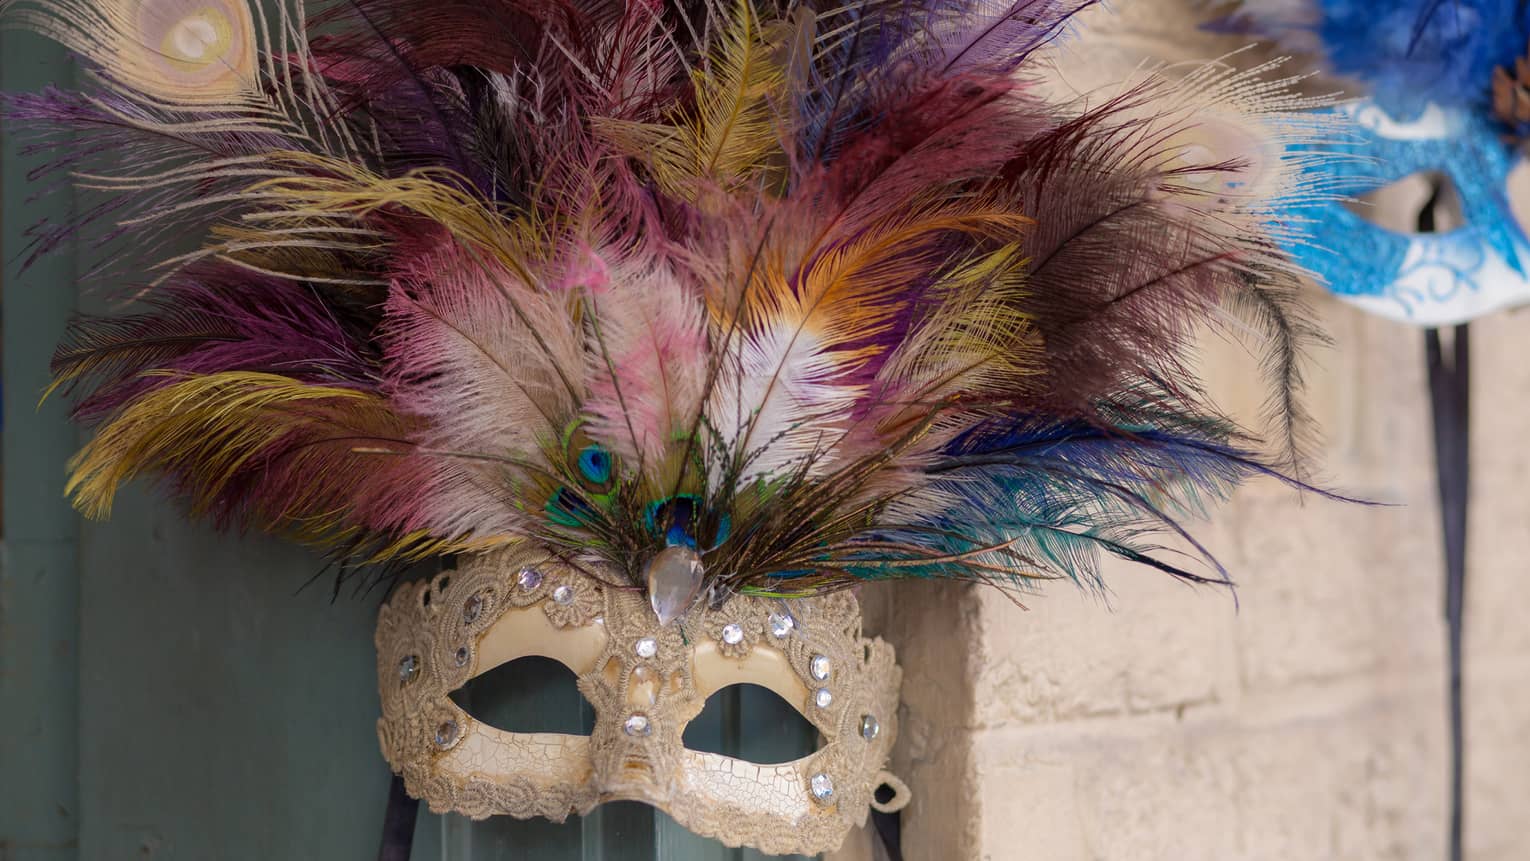 Colourful Mardi Gras mask with peacock feathers